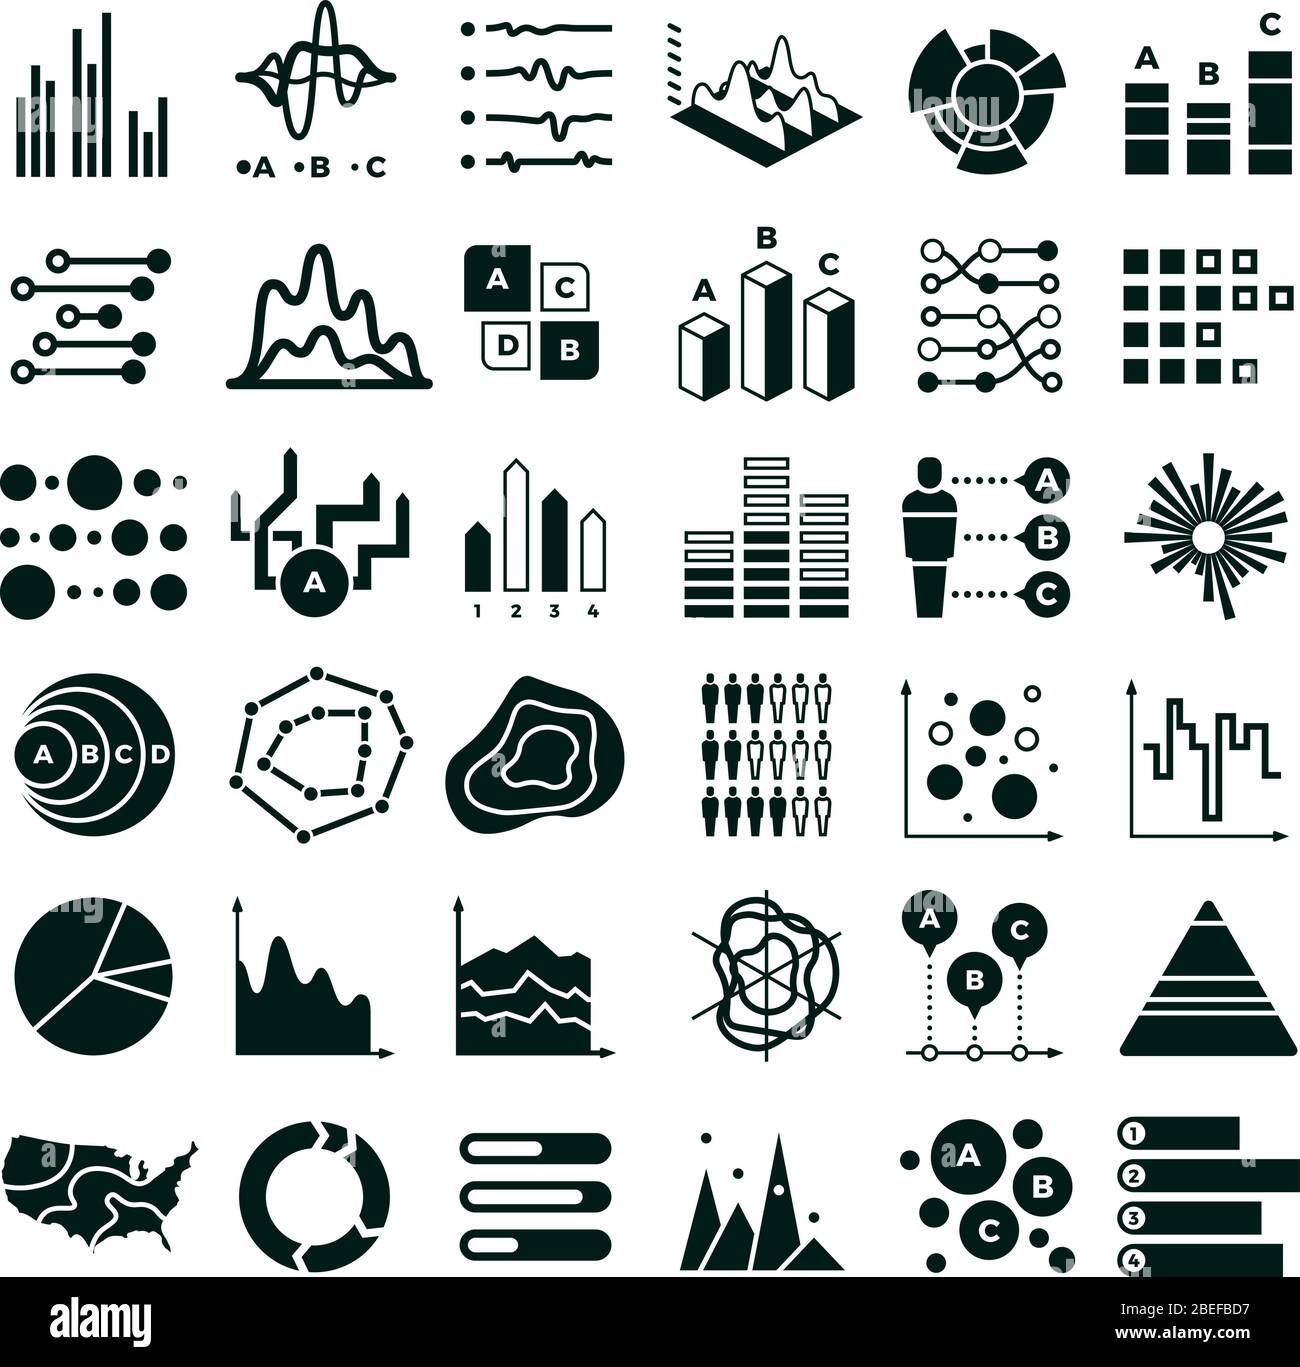 Diagram and infographic vector icons. Business data chart and graph symbols. Illustration of graph and data, diagram and chart information Stock Vector